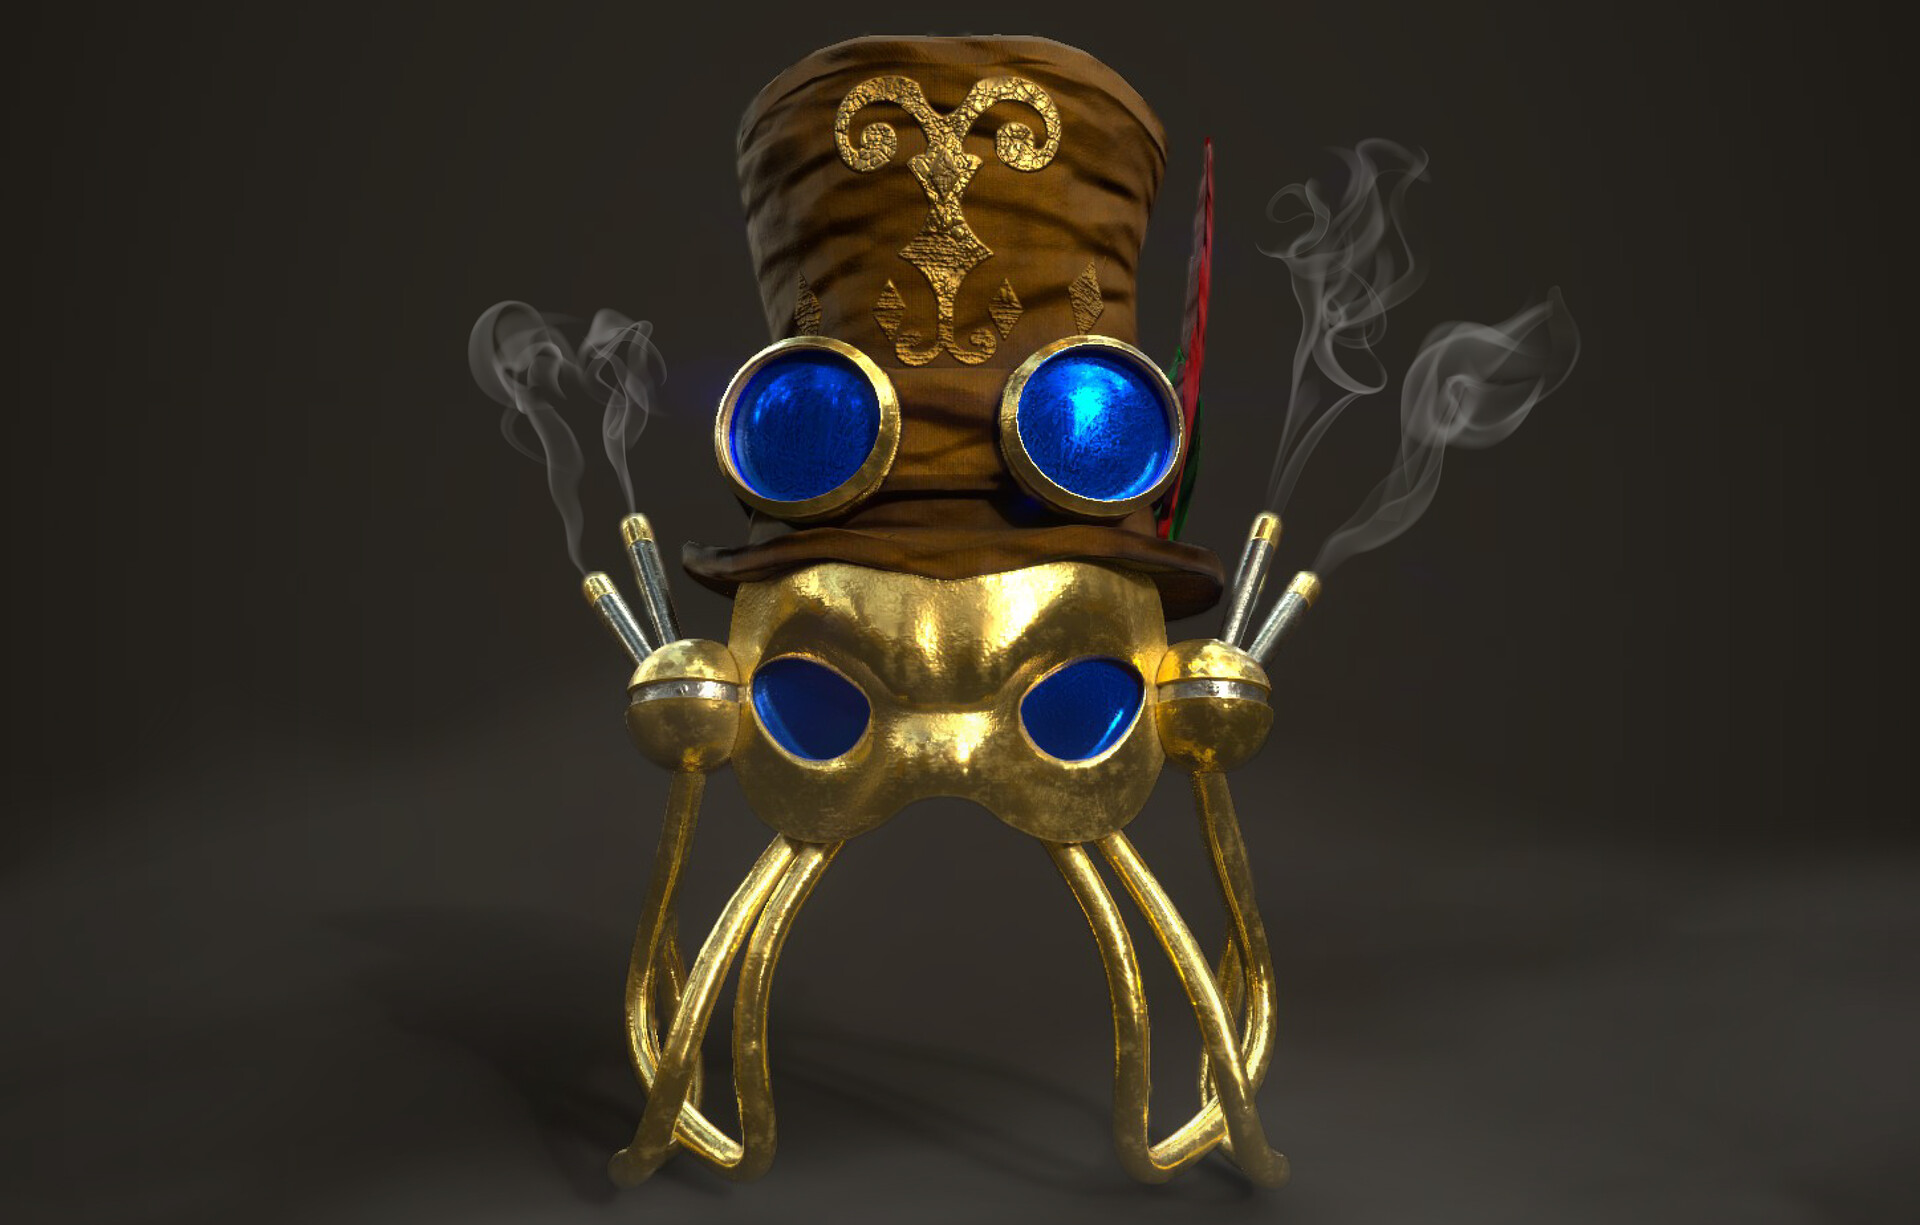 Roblox Mardi Gras Steampunk Mask, New Orleans, party, Party like it's  1712… and also New Orleans with the Roblox Mardi Gras Steampunk Mask! Get  it here